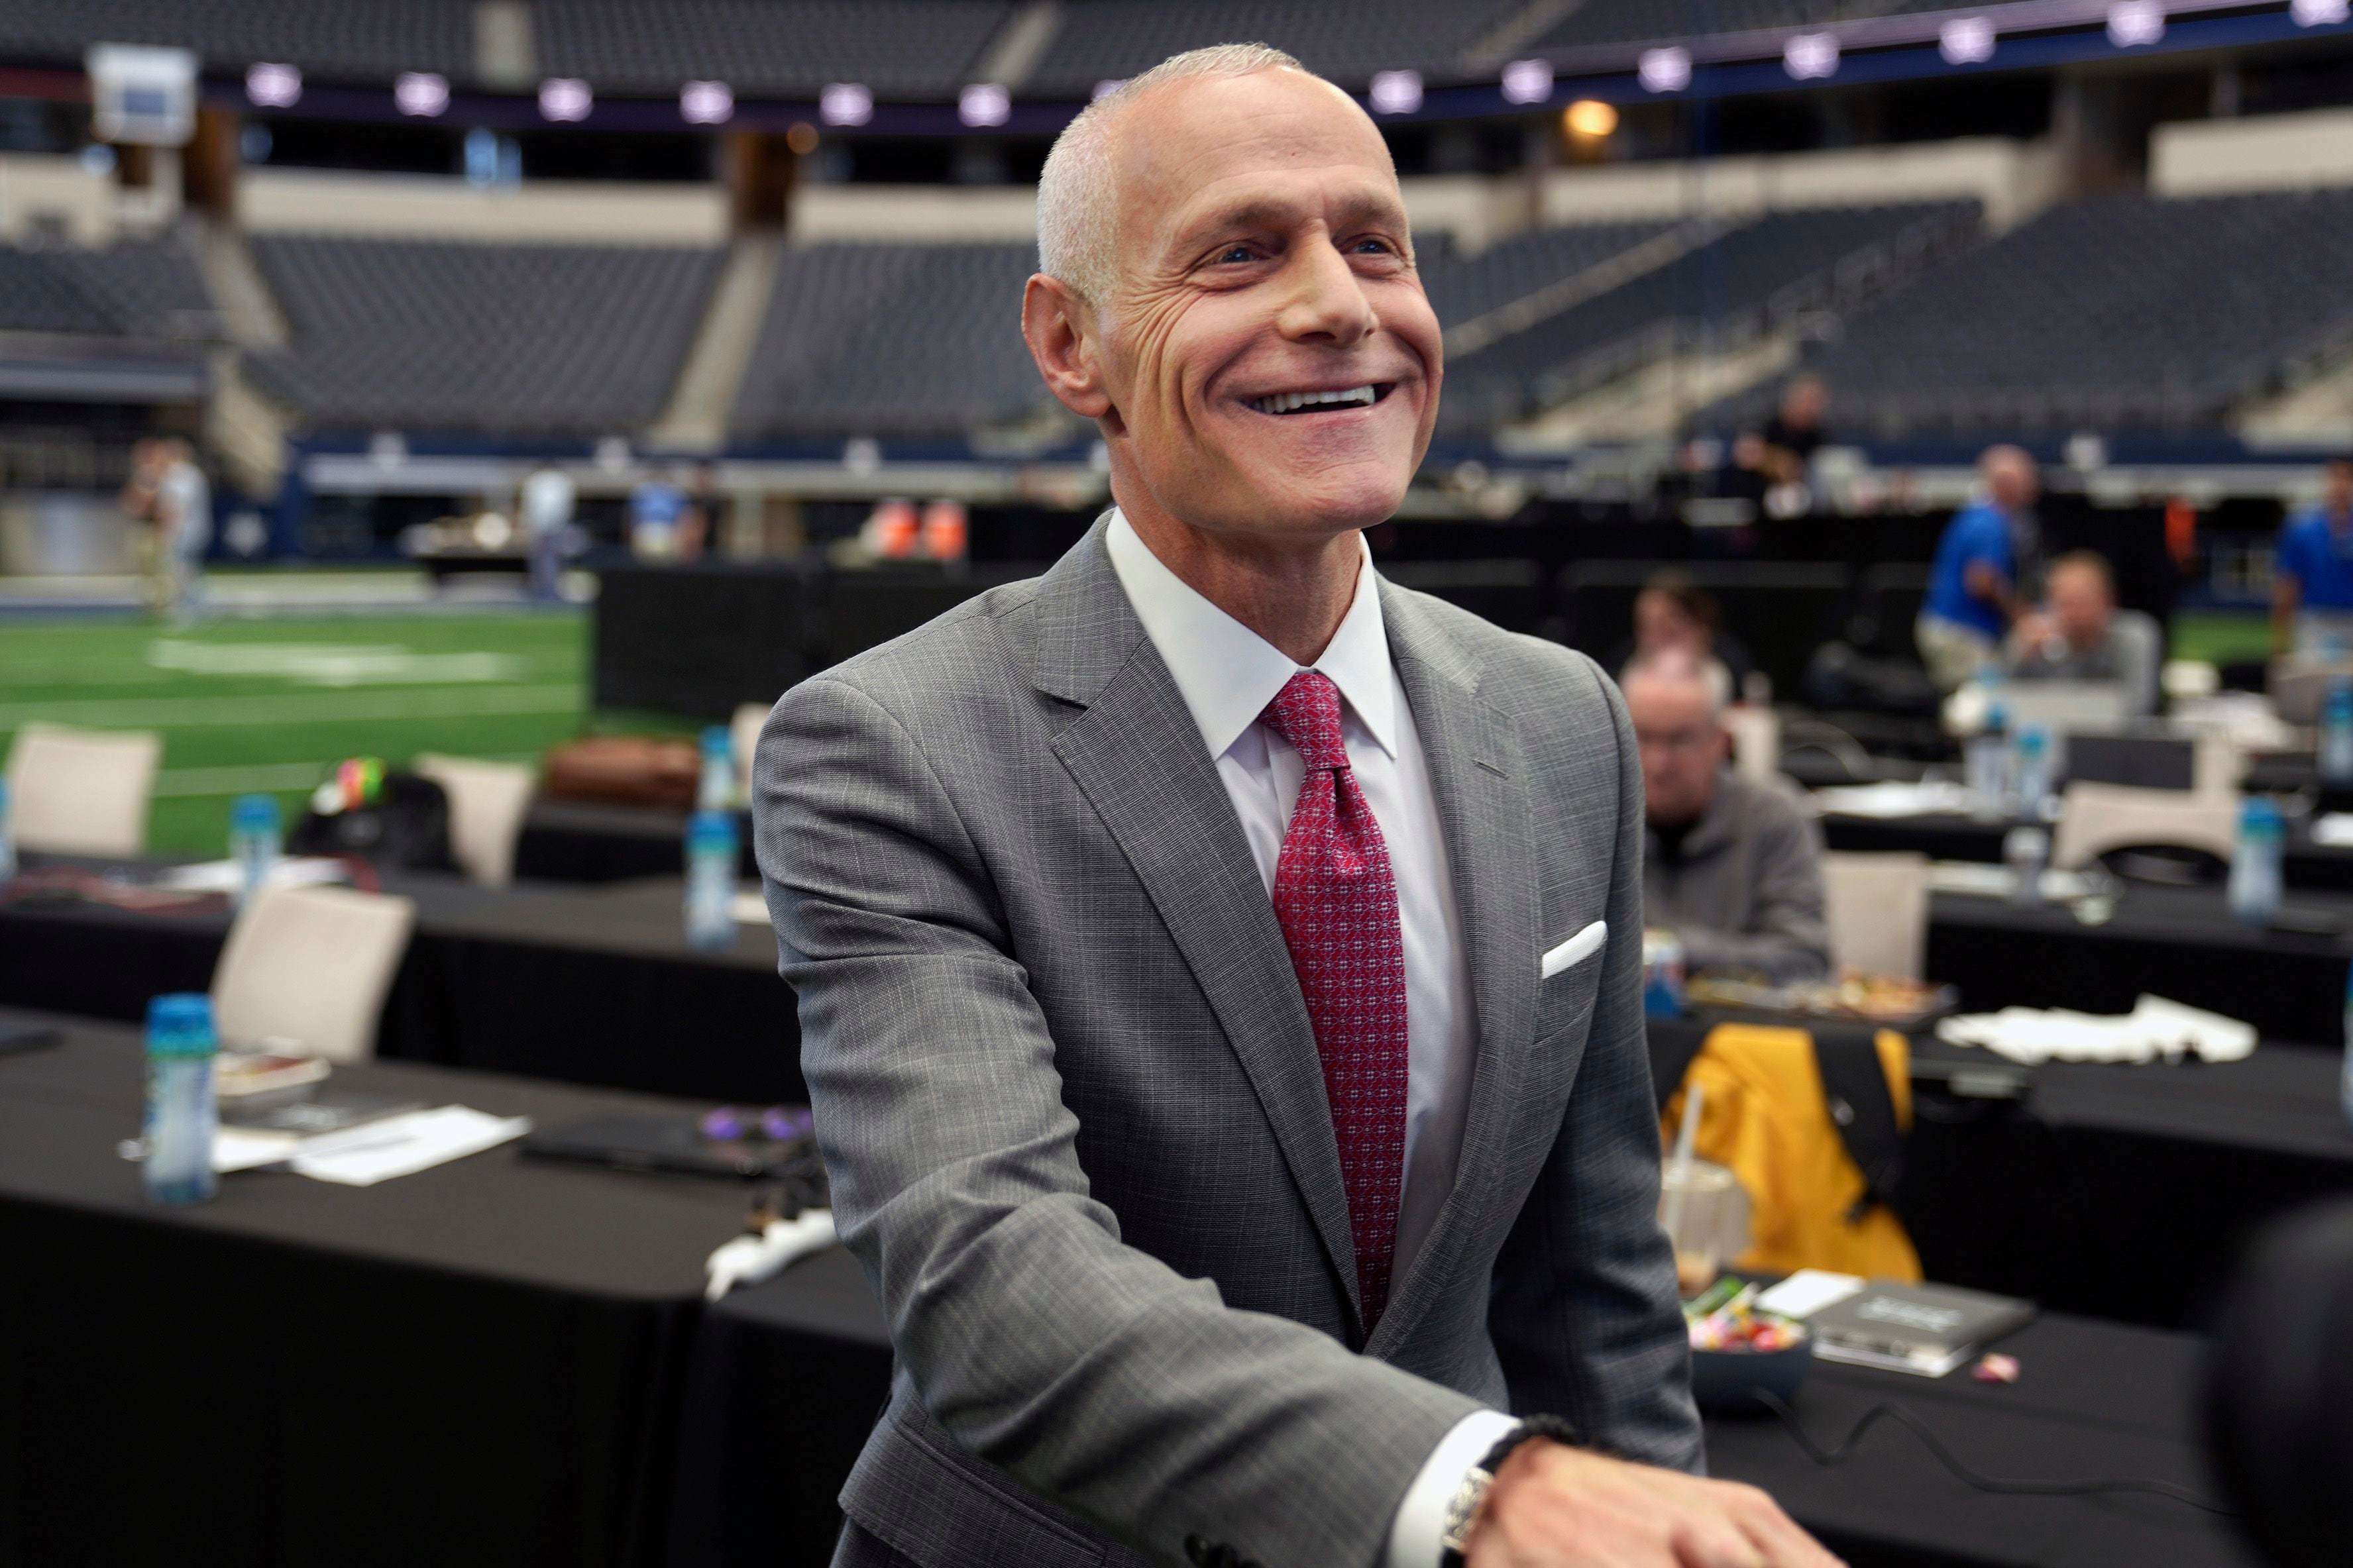 (LM Otero | AP) Big 12 Commissioner Brett Yormark smiles before speaking at the opening of the NCAA college football Big 12 media days in Arlington, Texas, July 12, 2023. When Colorado announced it was leaving the Pac-12 to return to the conference the Buffaloes jilted a dozen years ago, the Big 12 celebrated the reunion with a two-word statement released through Yomark: “They’re back.” 